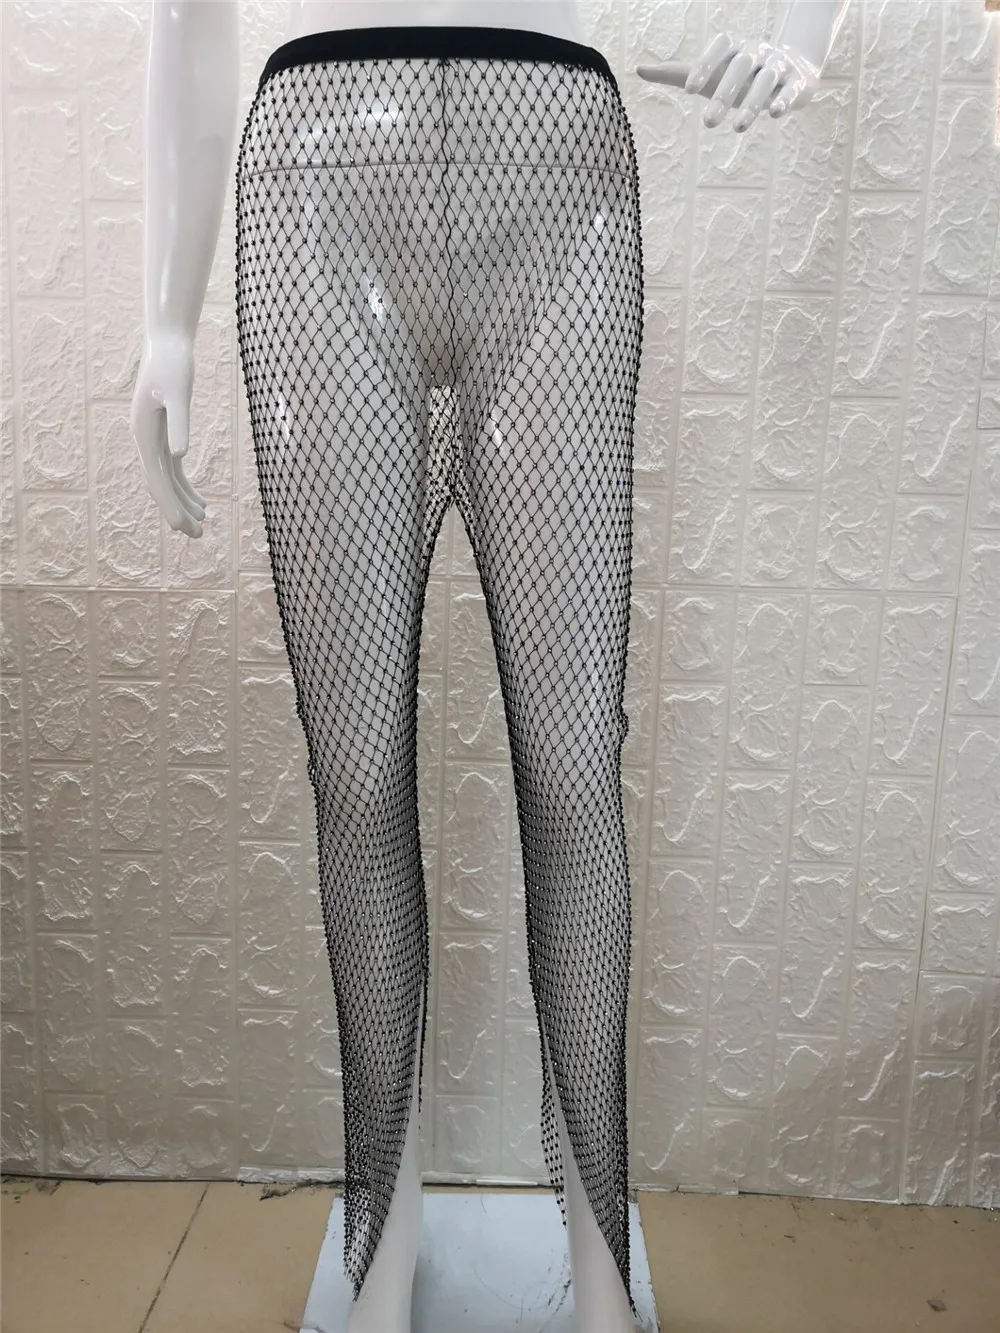 Shlz008 New Arrival Women Transparent Rhinestone Pants Trousers With ...